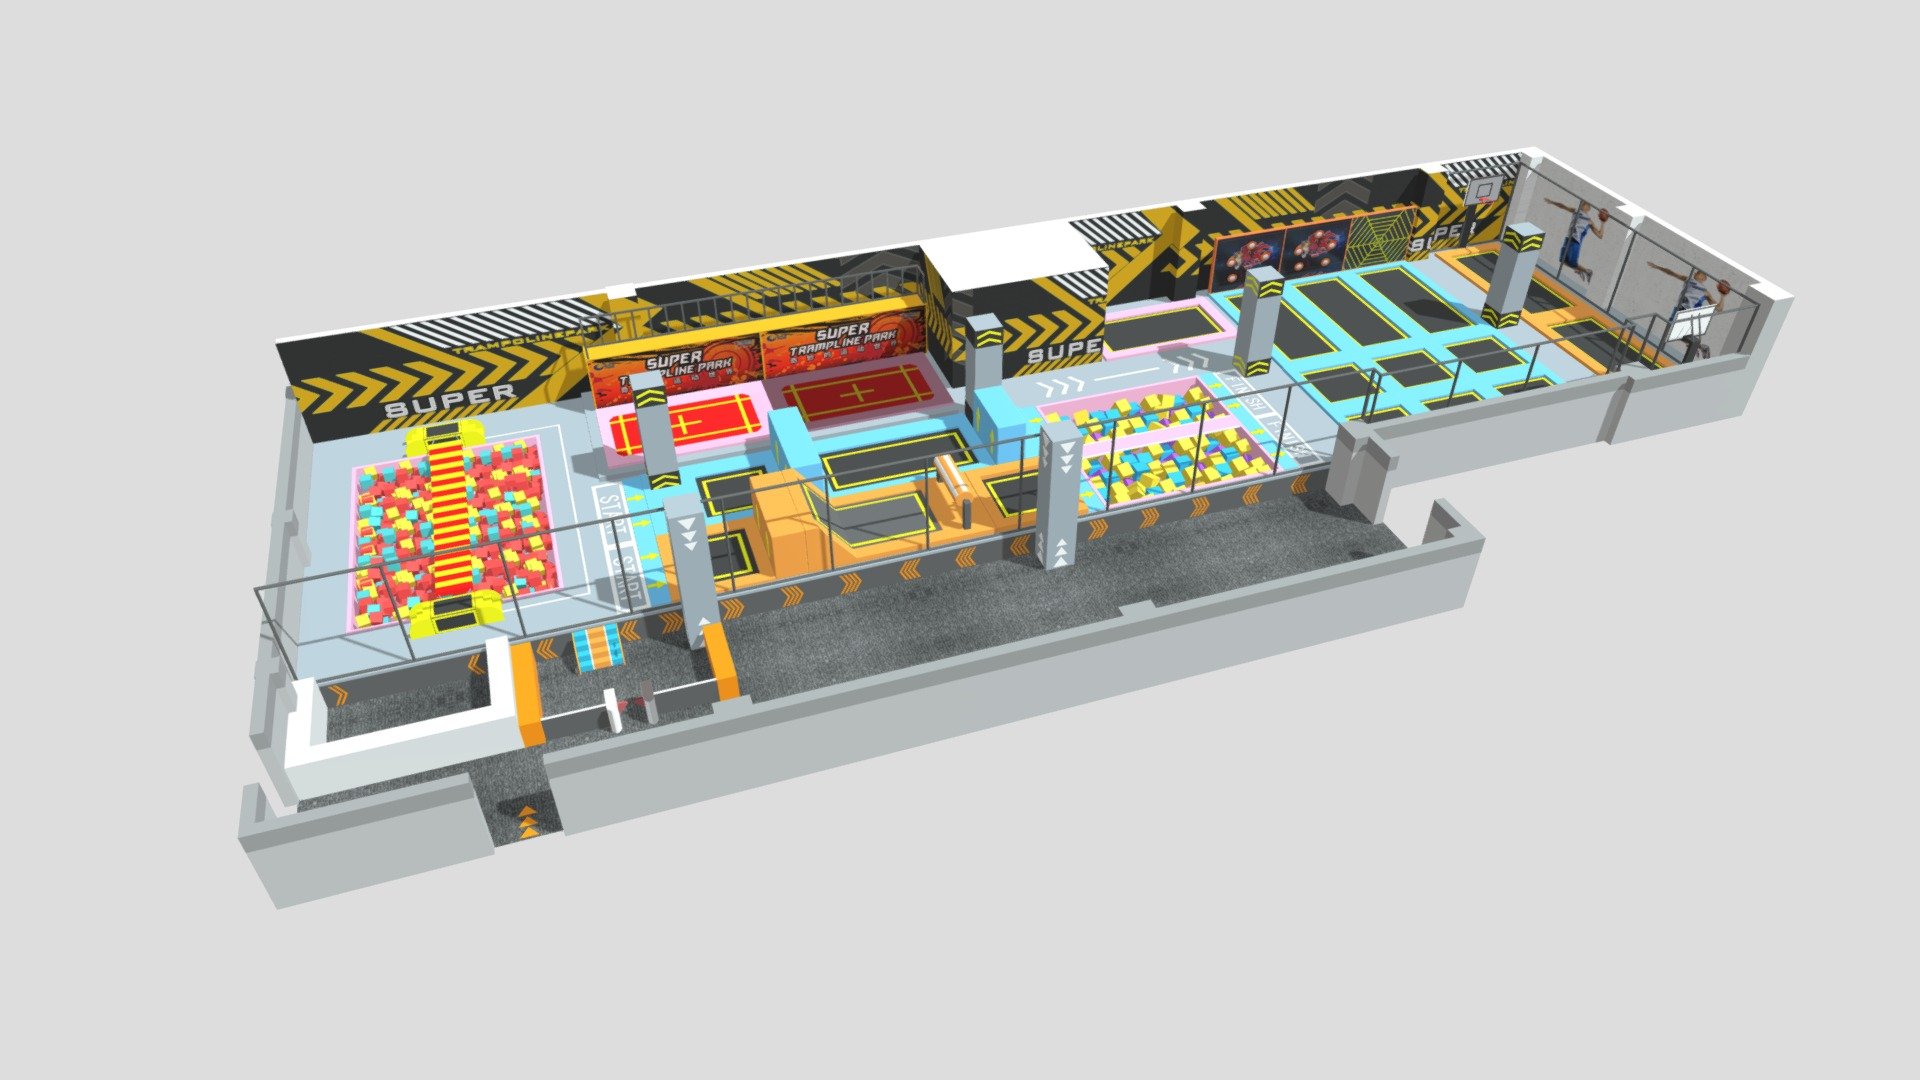 Sports and entertainment center

The 3D model of Amusement Park Equipment.

Hope you like it 3d model